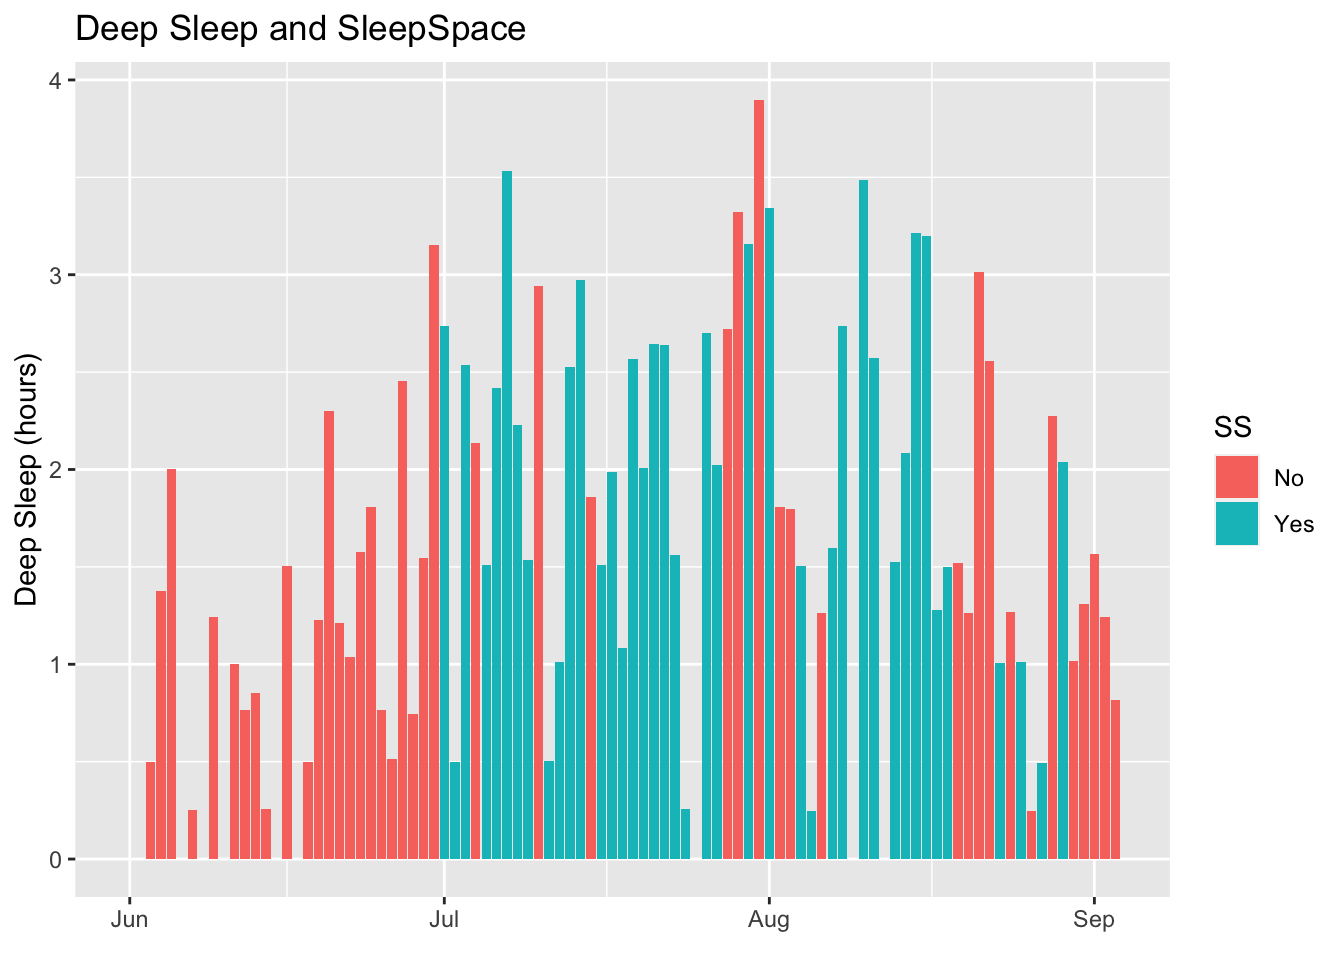 Overall amount of deep sleep appears to be better on nights when I use SS (SleepSpace)